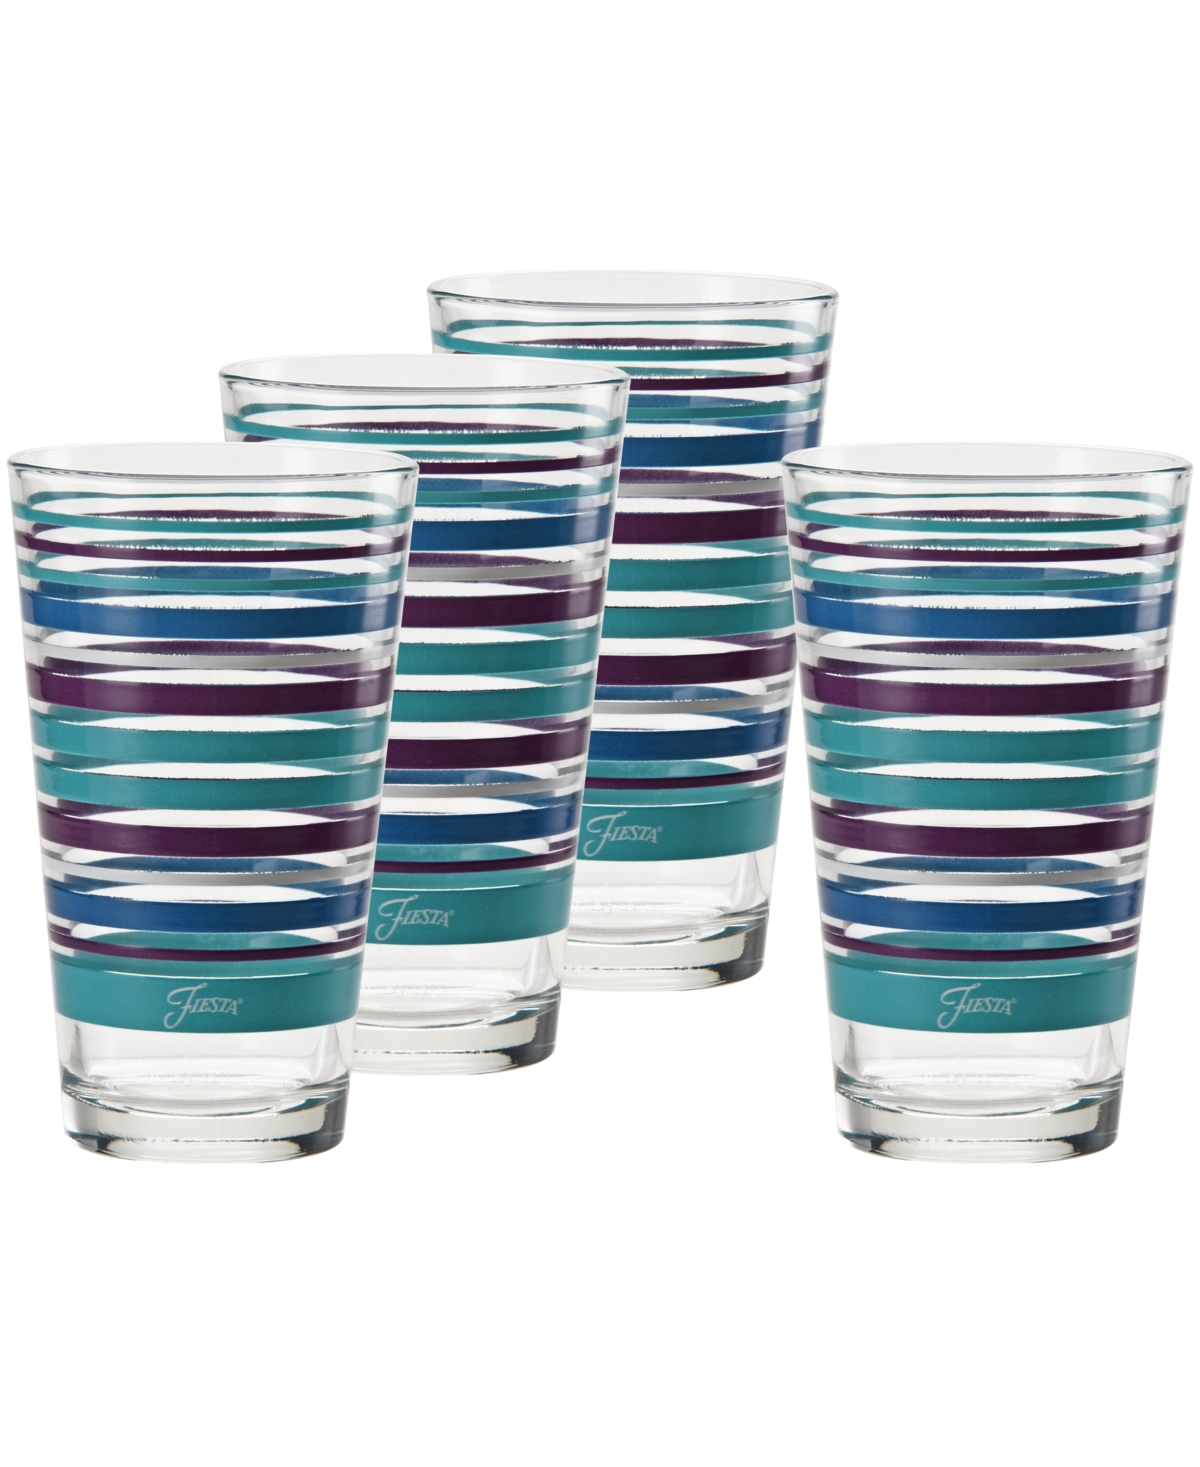 Fiesta Coastal Stripes 16-ounce Tapered Cooler Glass, Set Of 4 In Turquoise,lapis,mulberry And White